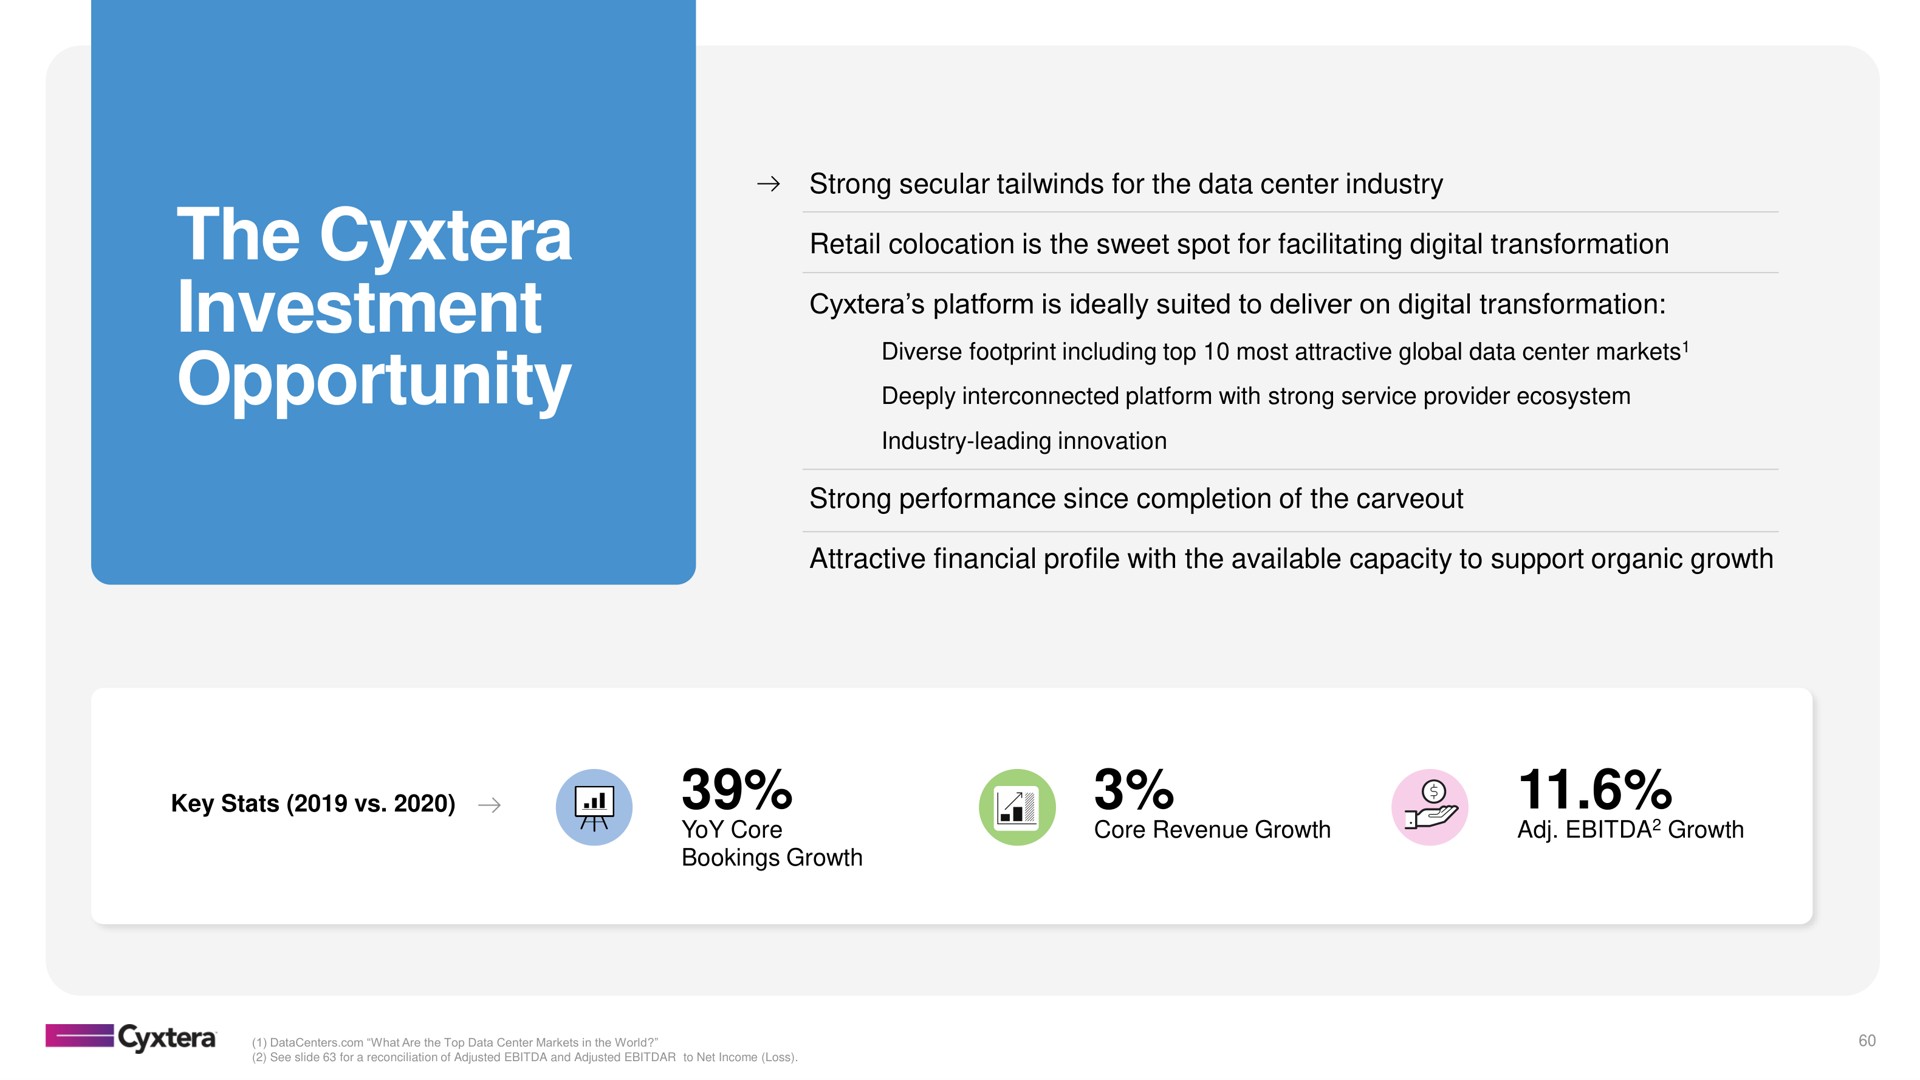 the investment opportunity key a | Cyxtera